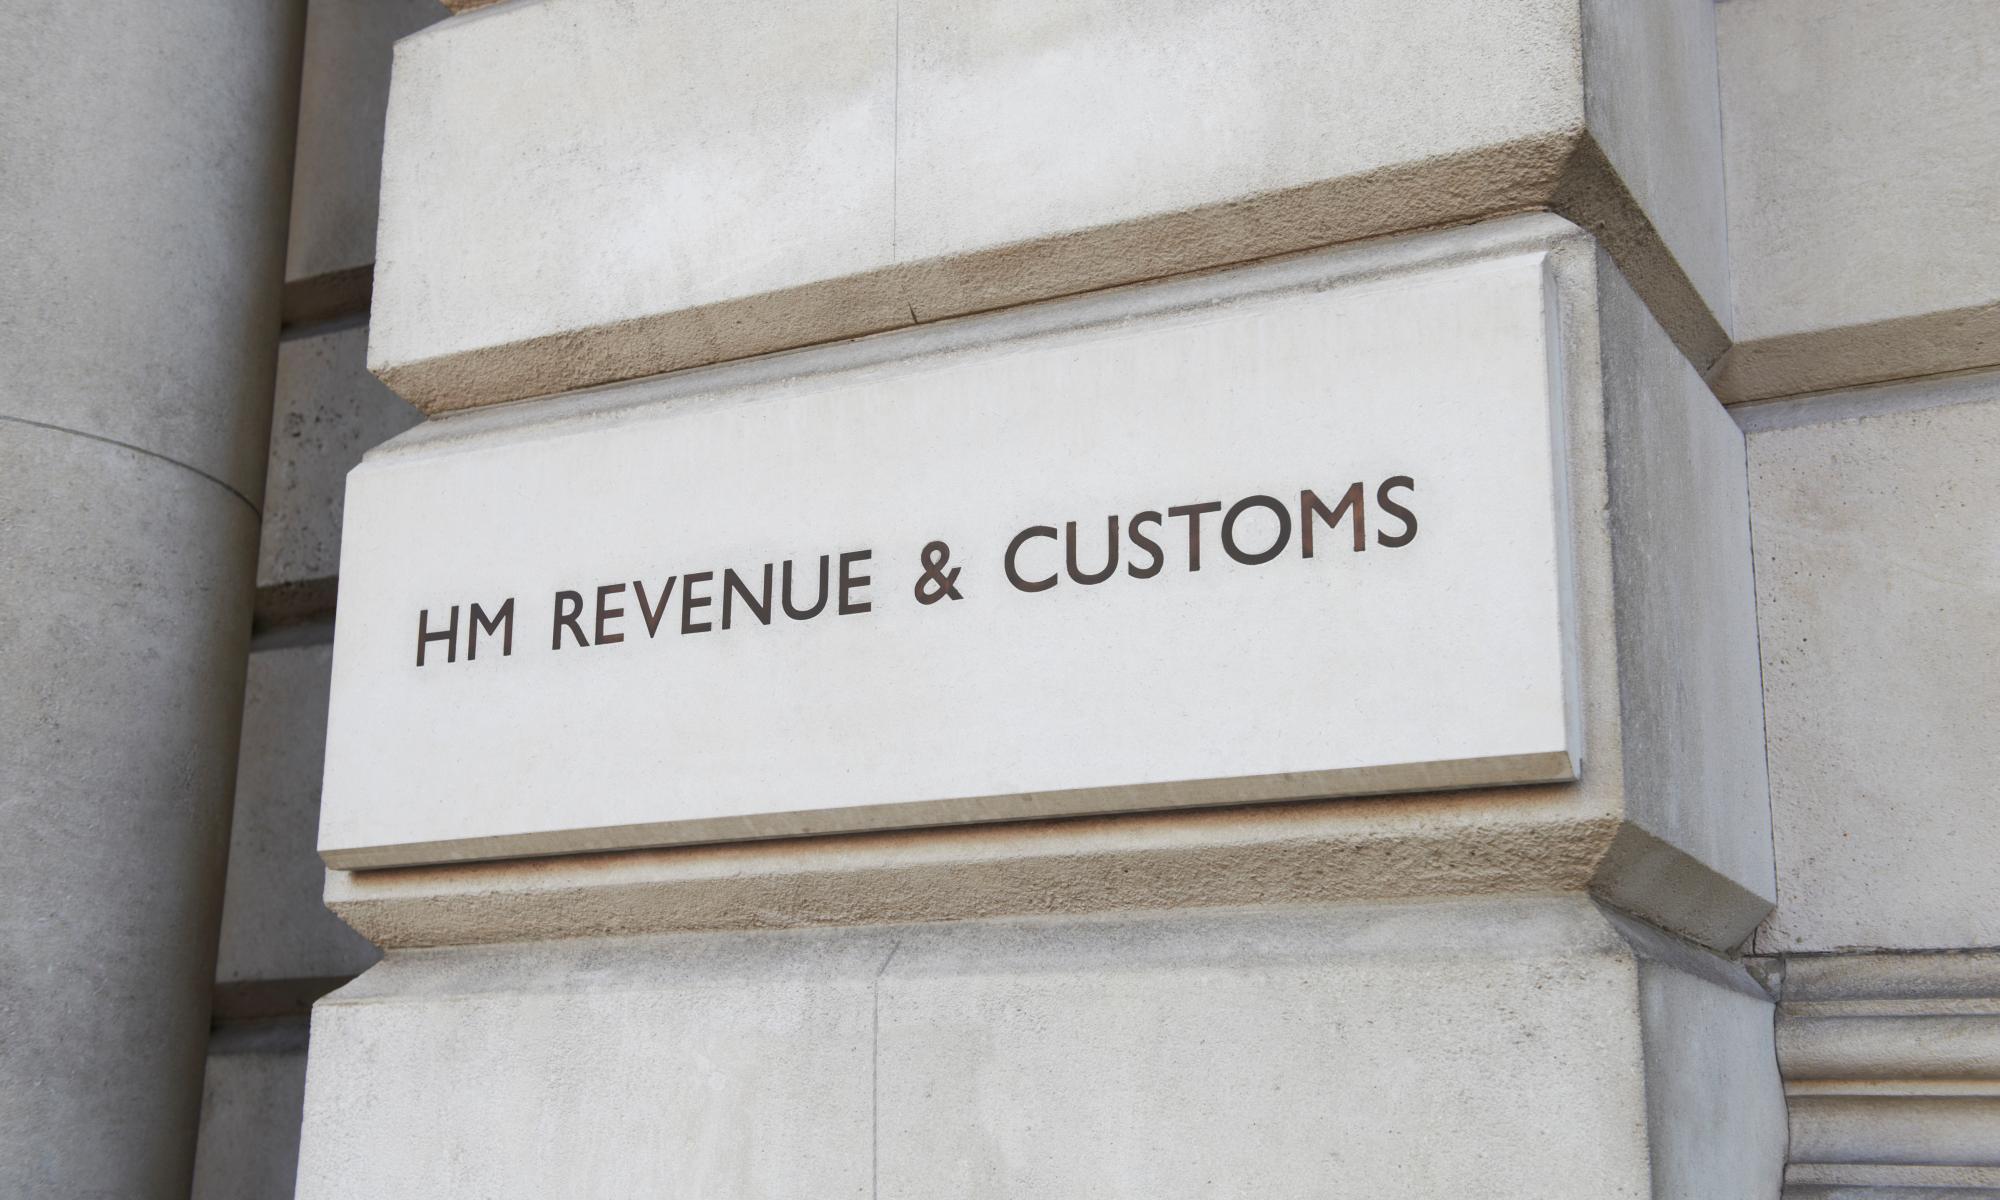 hmrc investigations of wealthy ‘tax dodgers’ halve in five years